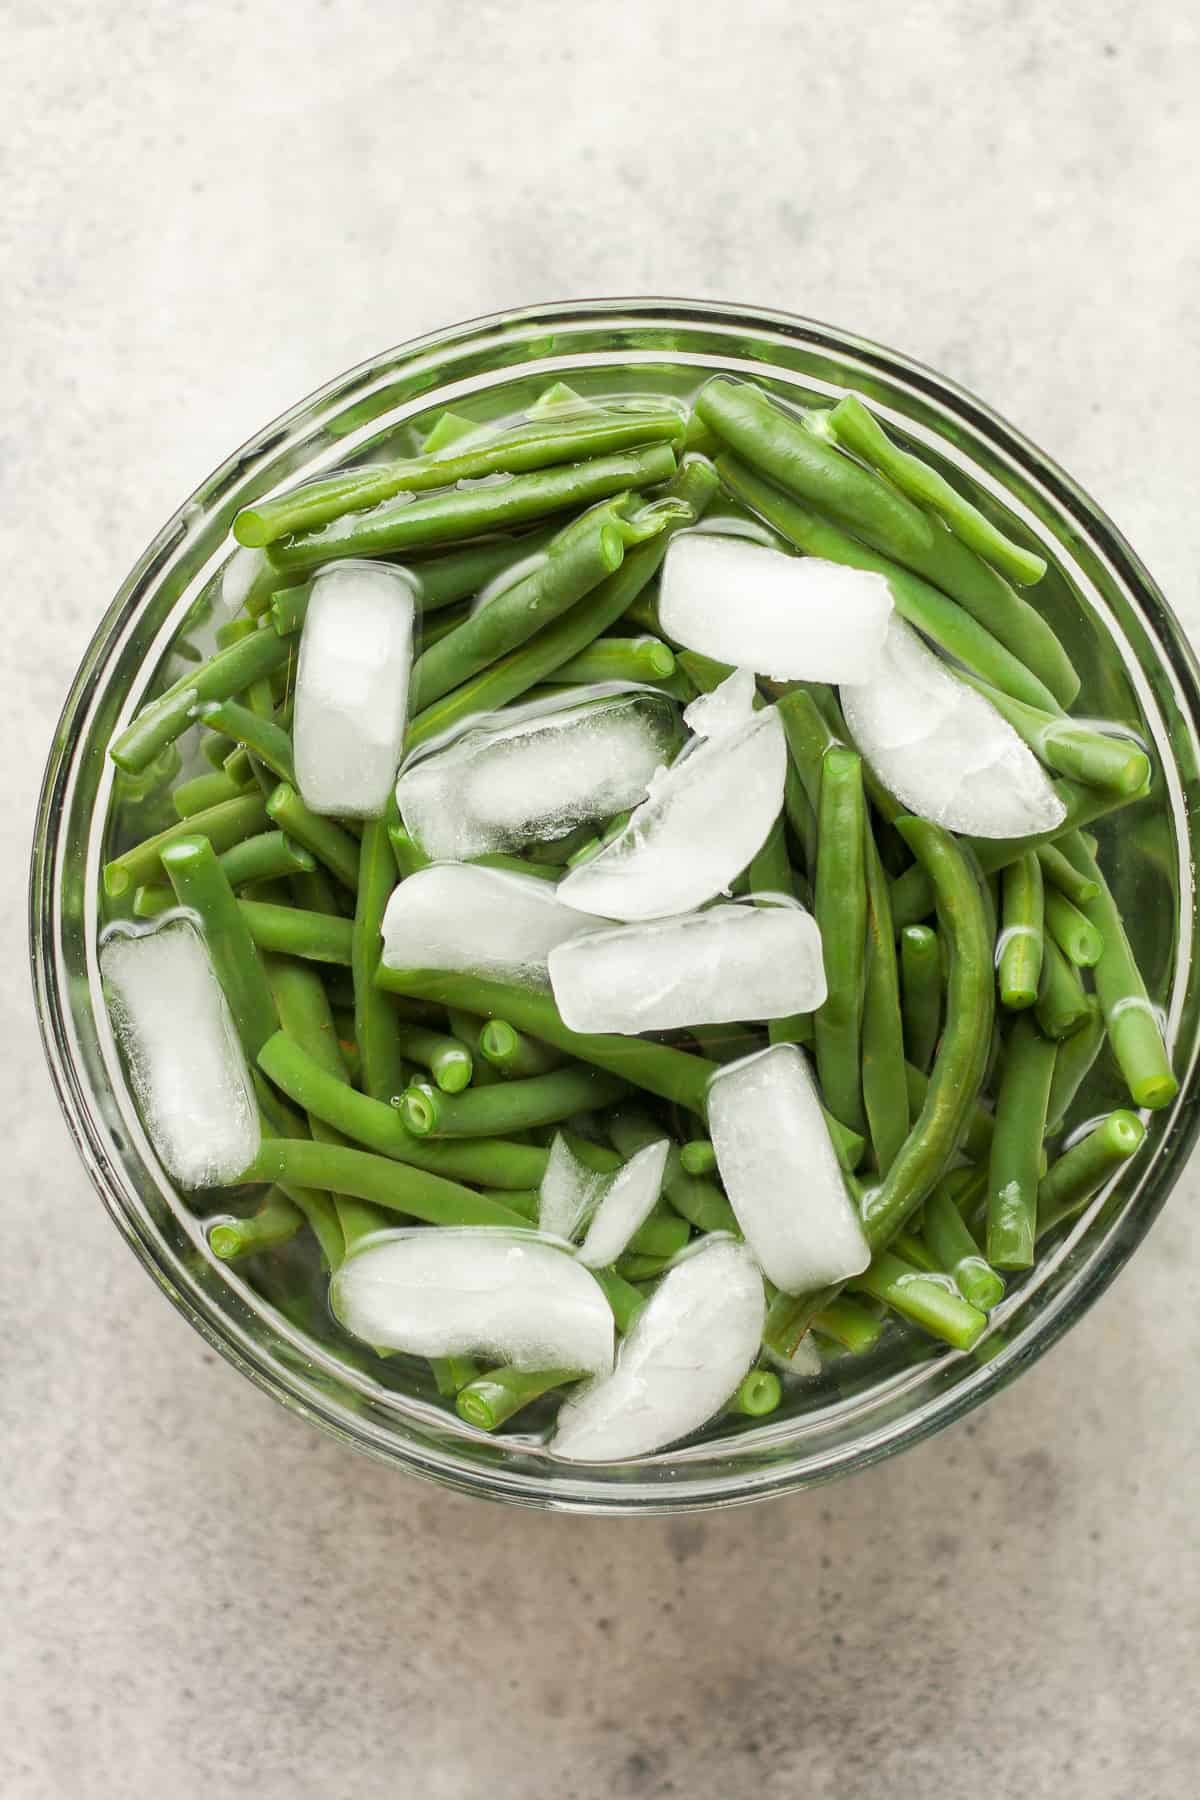 A bowl of the green beans in ice water.